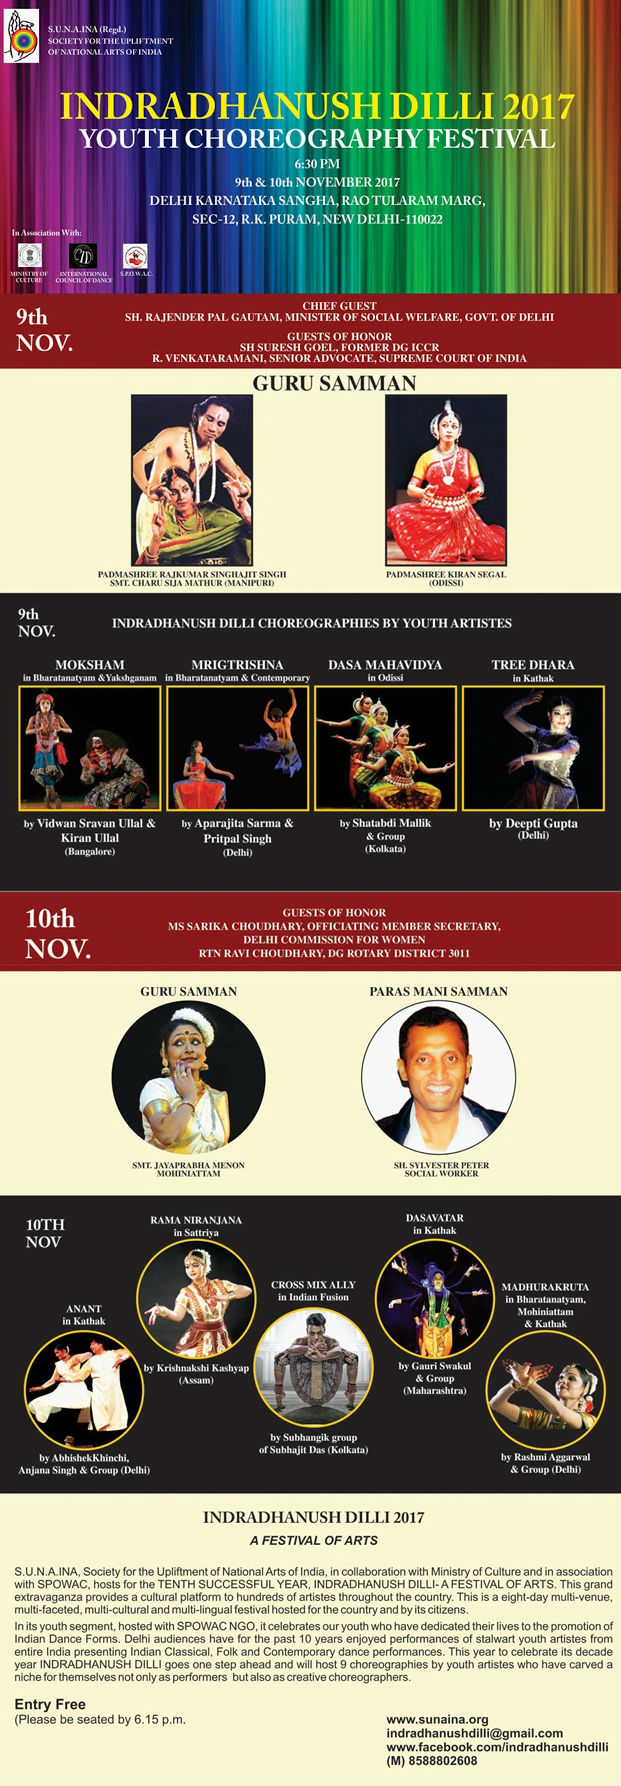 INDRADHANUSH DILLI 2017 - A NATIONAL FESTIVAL OF ARTS